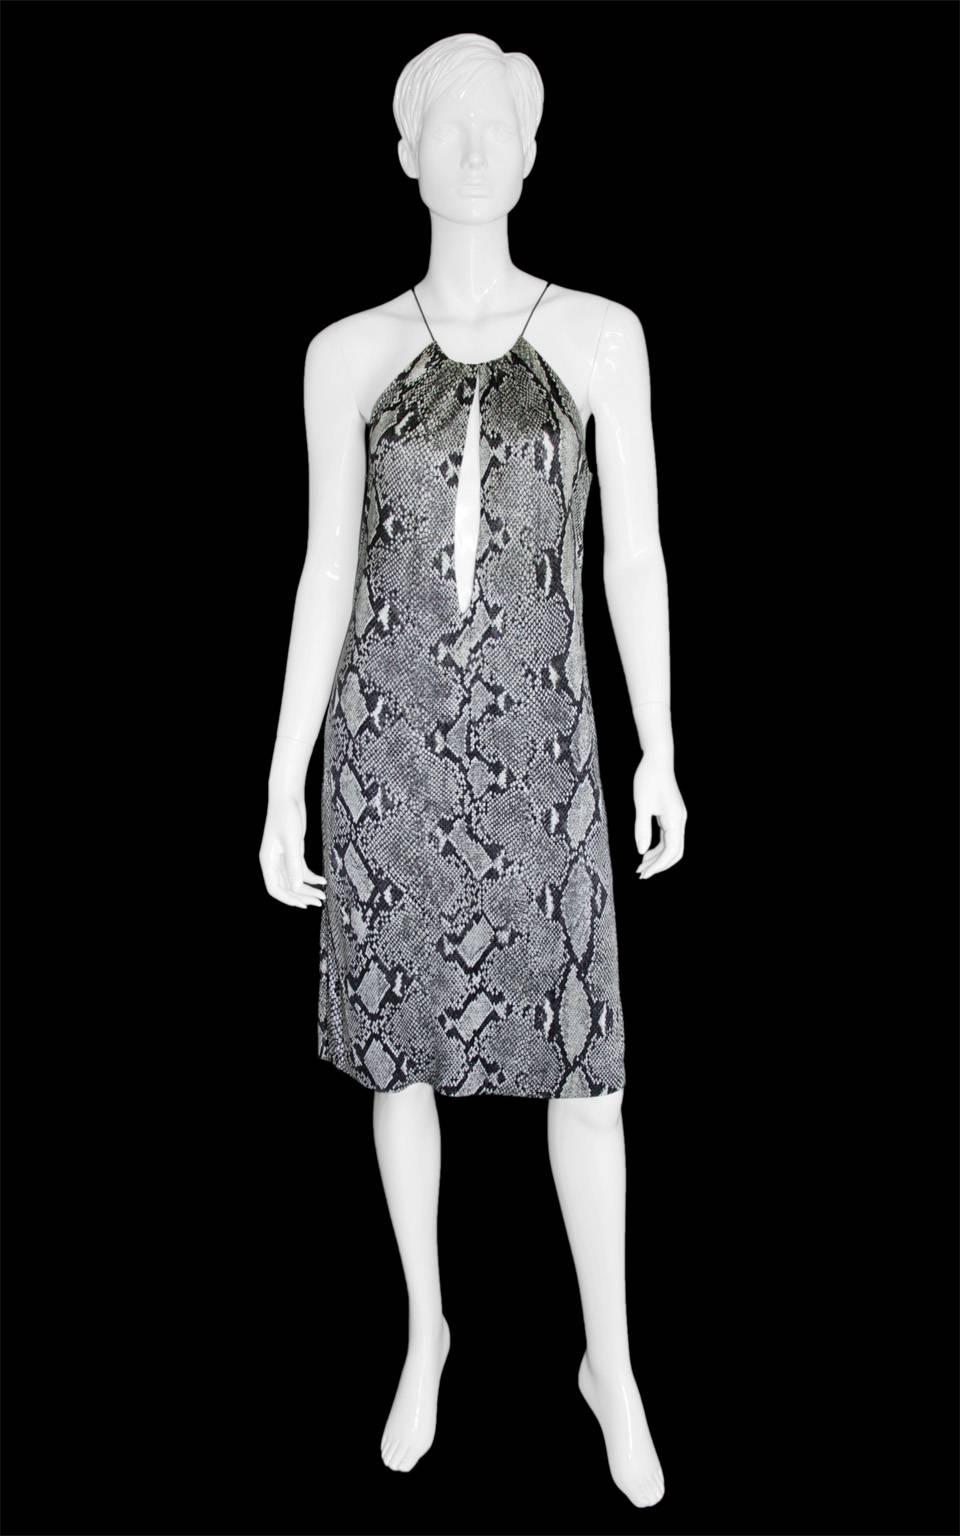 Utterly Iconic Tom Ford For Gucci Spring Summer 2000 Python Print Runway & Celeb Dress In Italian Size 44

That amazing black & gray python print jersey dress from Tom Ford's gorgeous Spring/Summer 2000 Collection for Gucci! Considered one